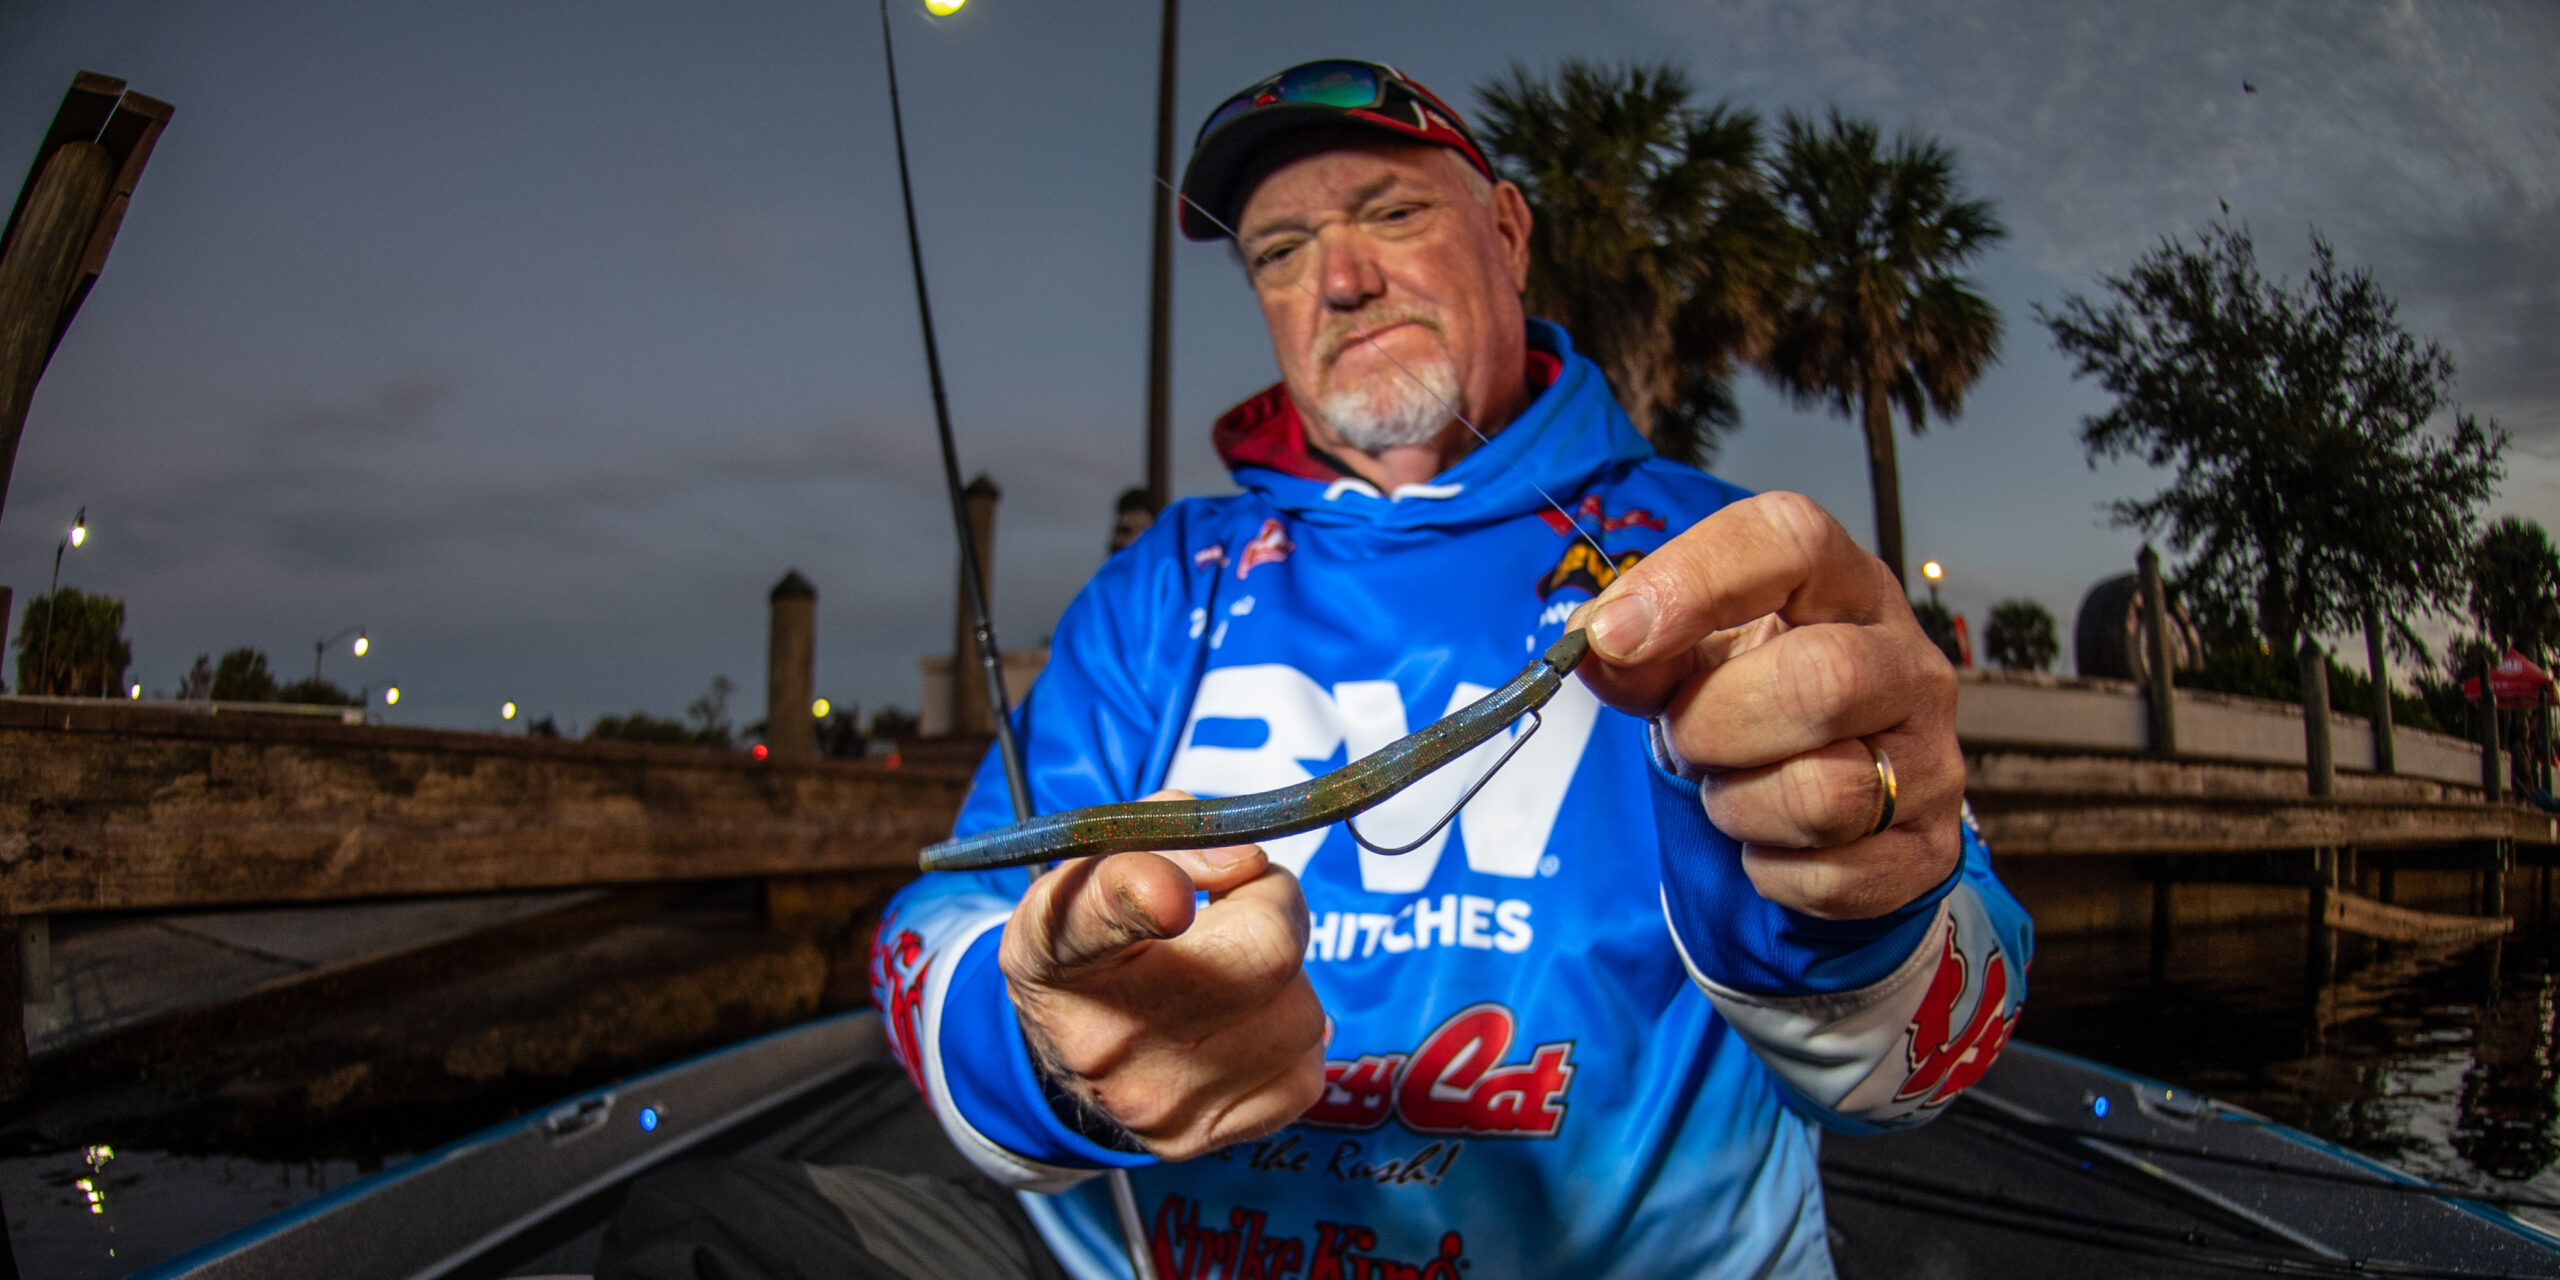 Westside Bait and Tackle - Congratulations to King & King! Anglers